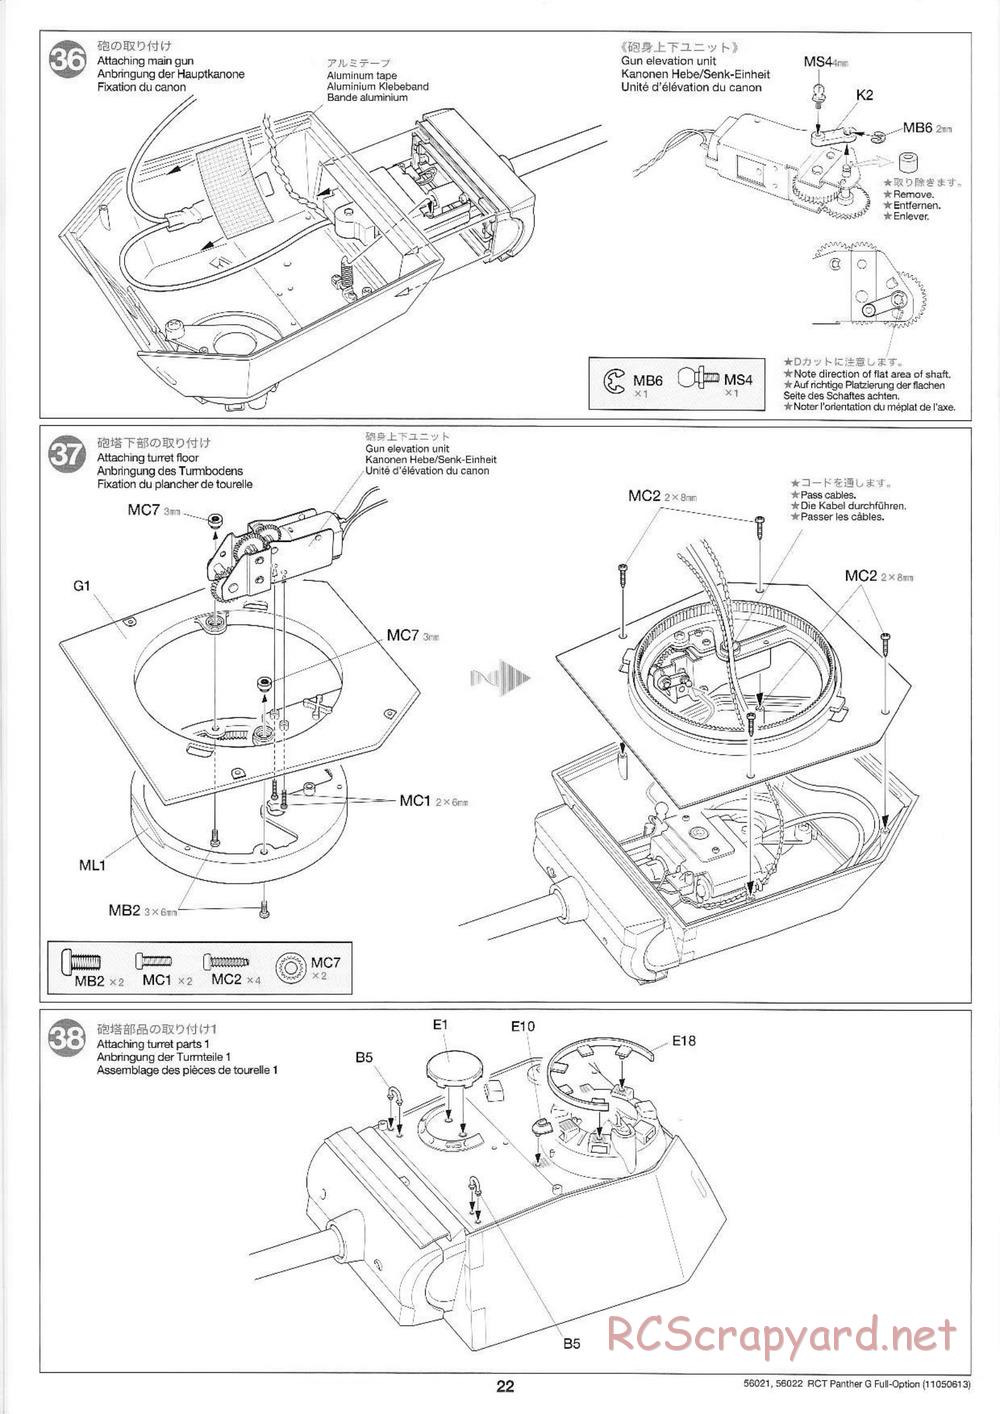 Tamiya - Panther Type G - 1/16 Scale Chassis - Manual - Page 22